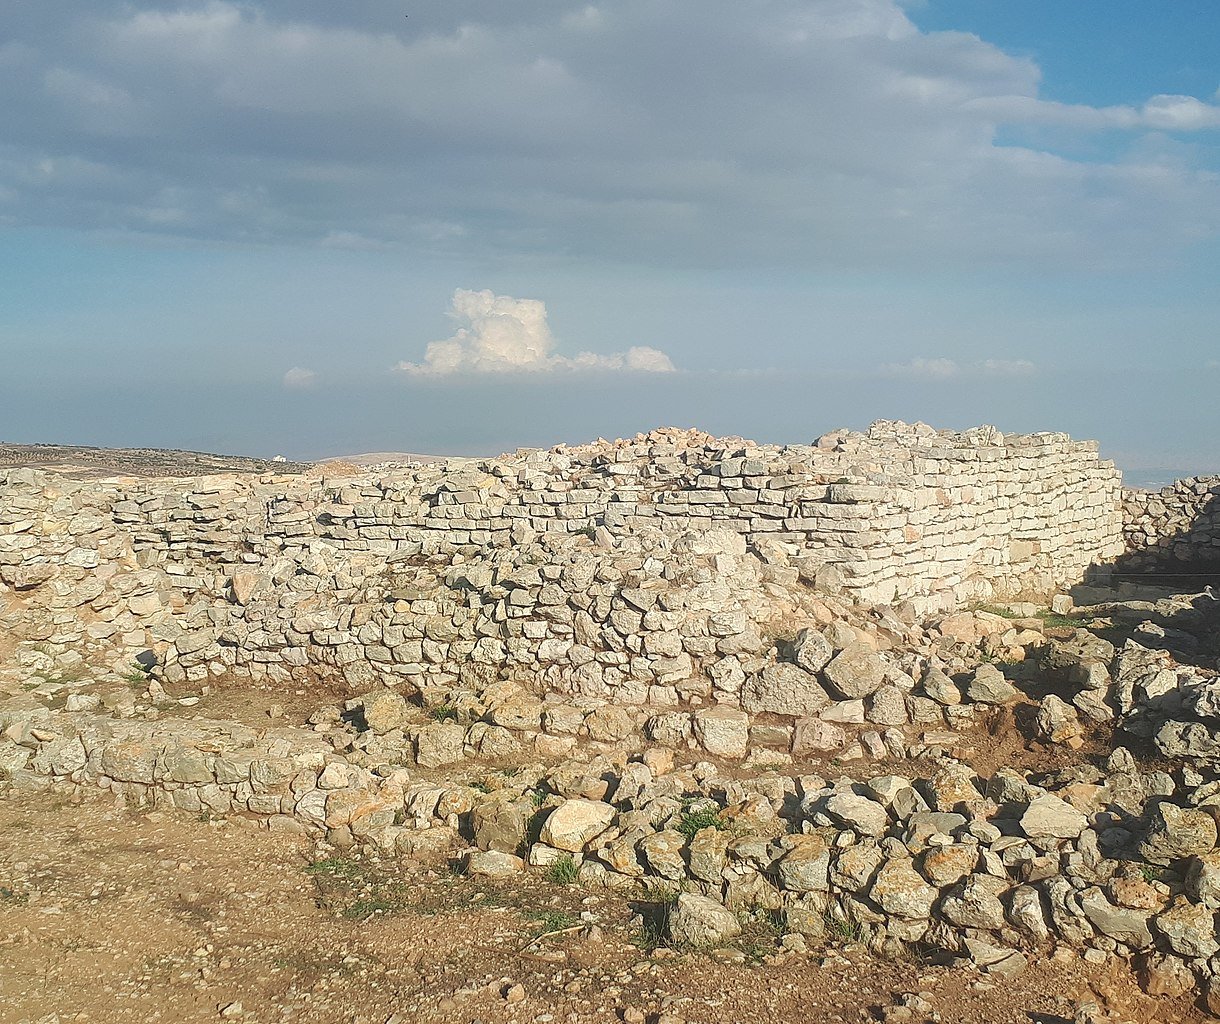 Ruins of Et-Tell, traditionally (but incorrectly) identified with the Biblical city of Ai